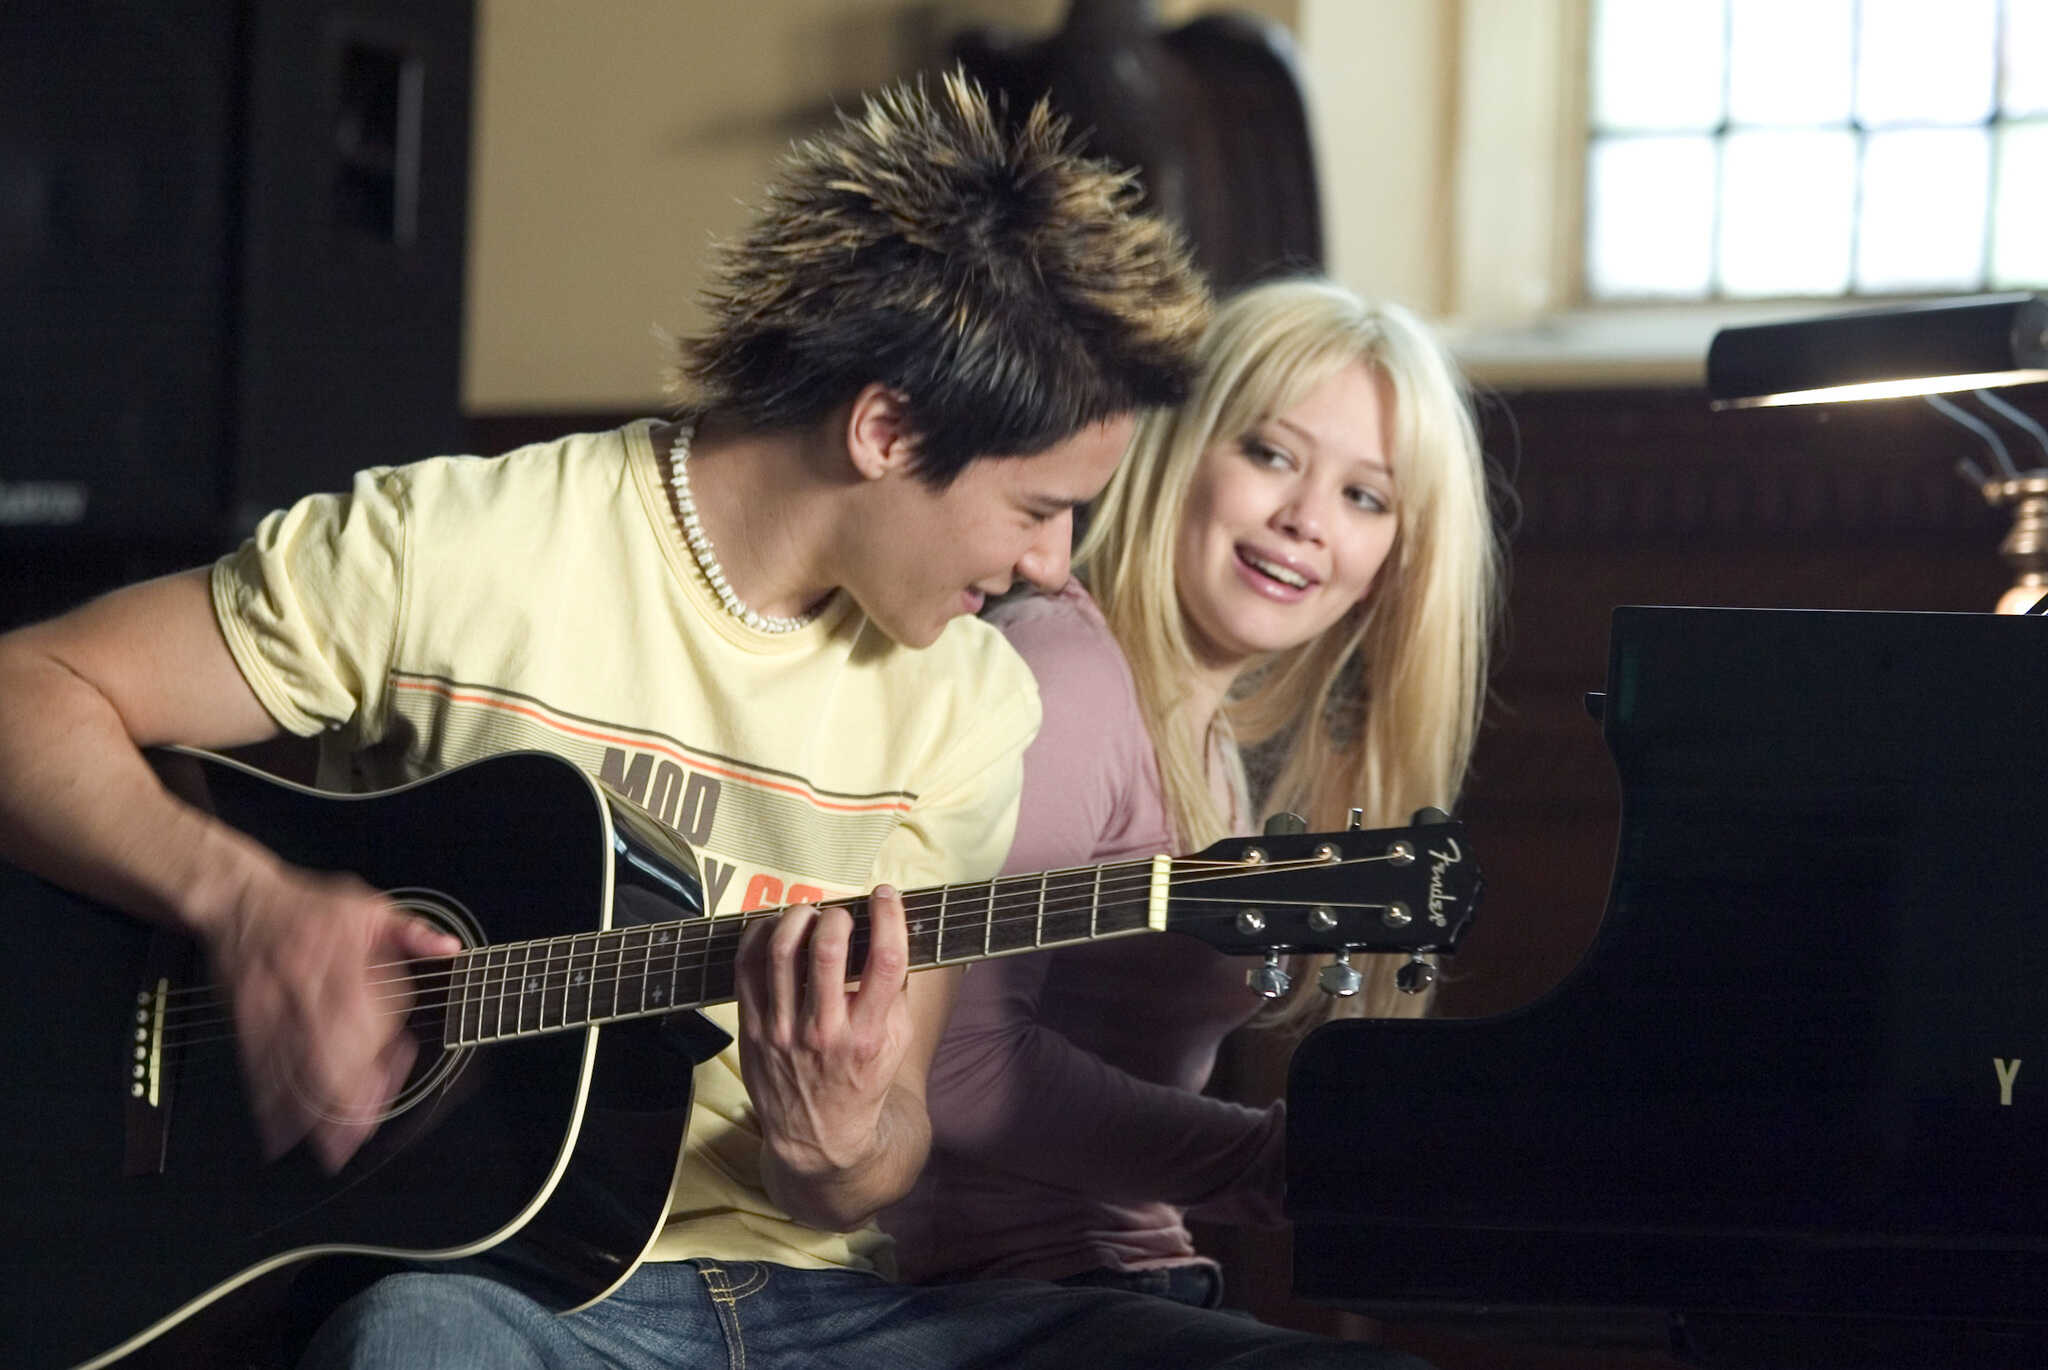 A boy plays guitar while a girl plays piano in this image from New Line Cinema.